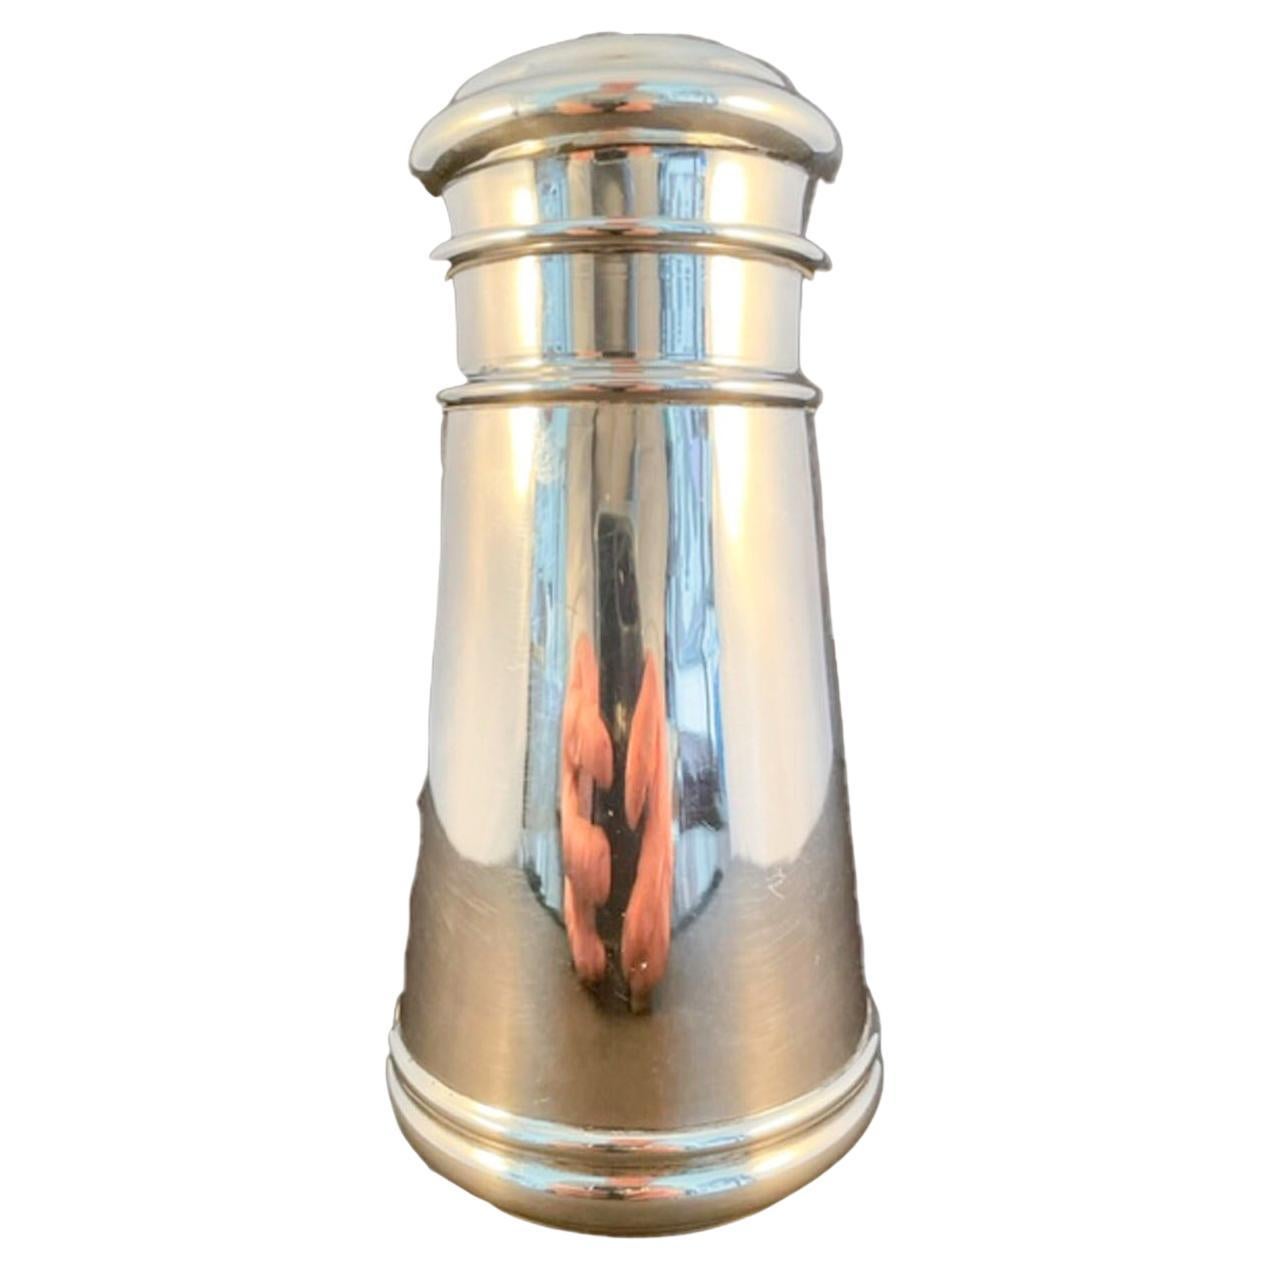 English Art Deco Silver Plate Cocktail Shaker, Charles S. Green & Co.